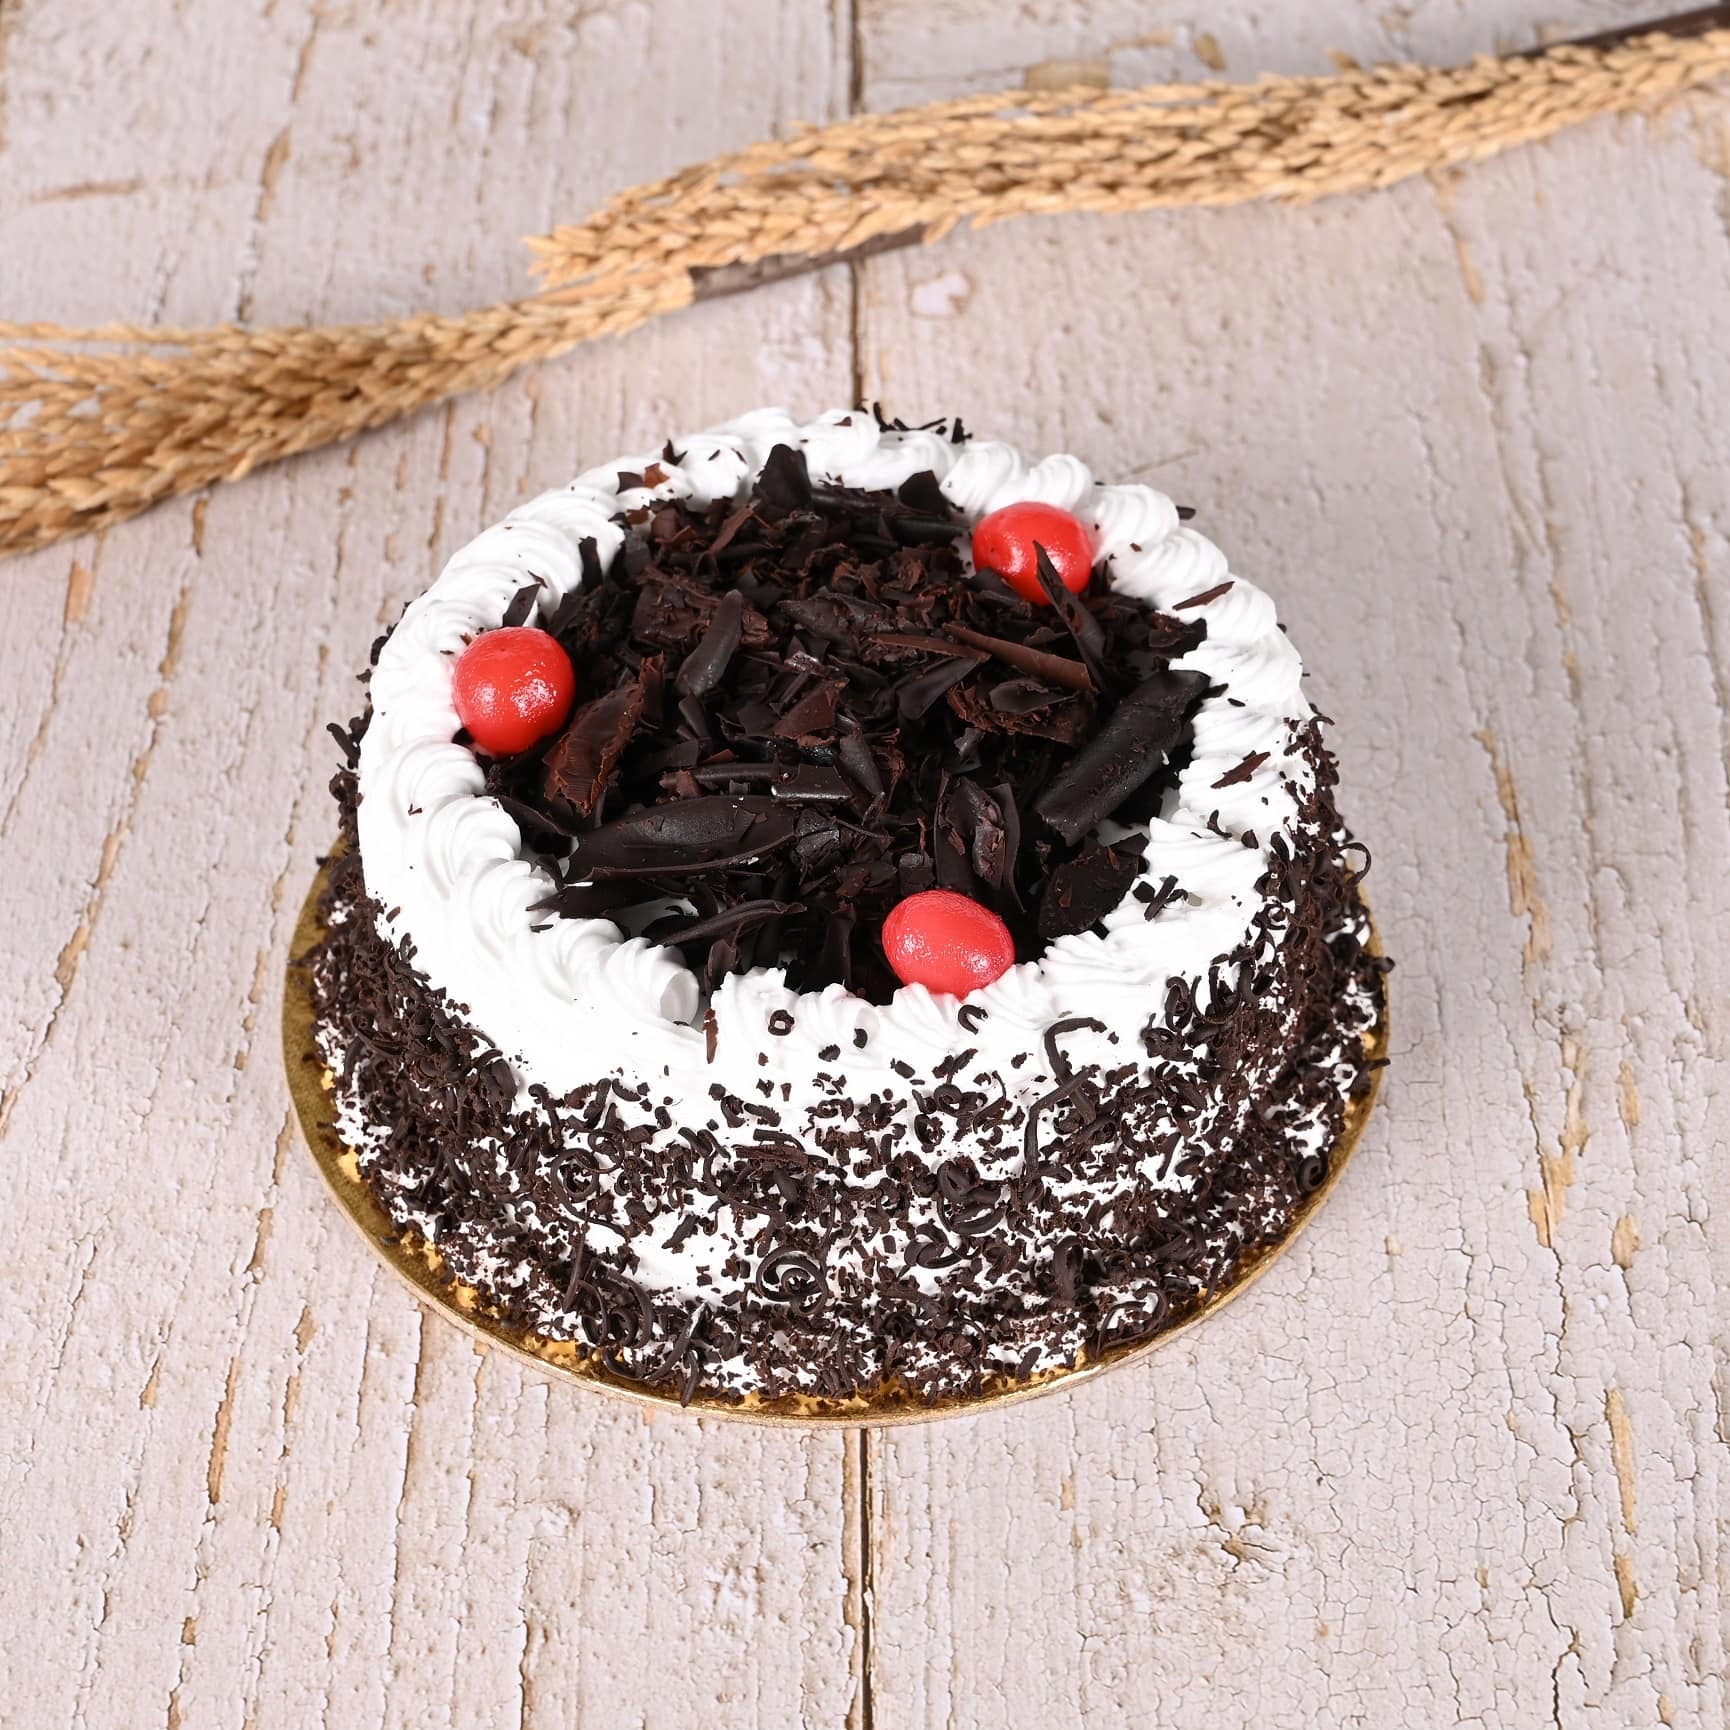 Buy Cocoa Bakes Fresh Cake - Strawberry, Eggless 250 gm Online at Best  Price. of Rs null - bigbasket